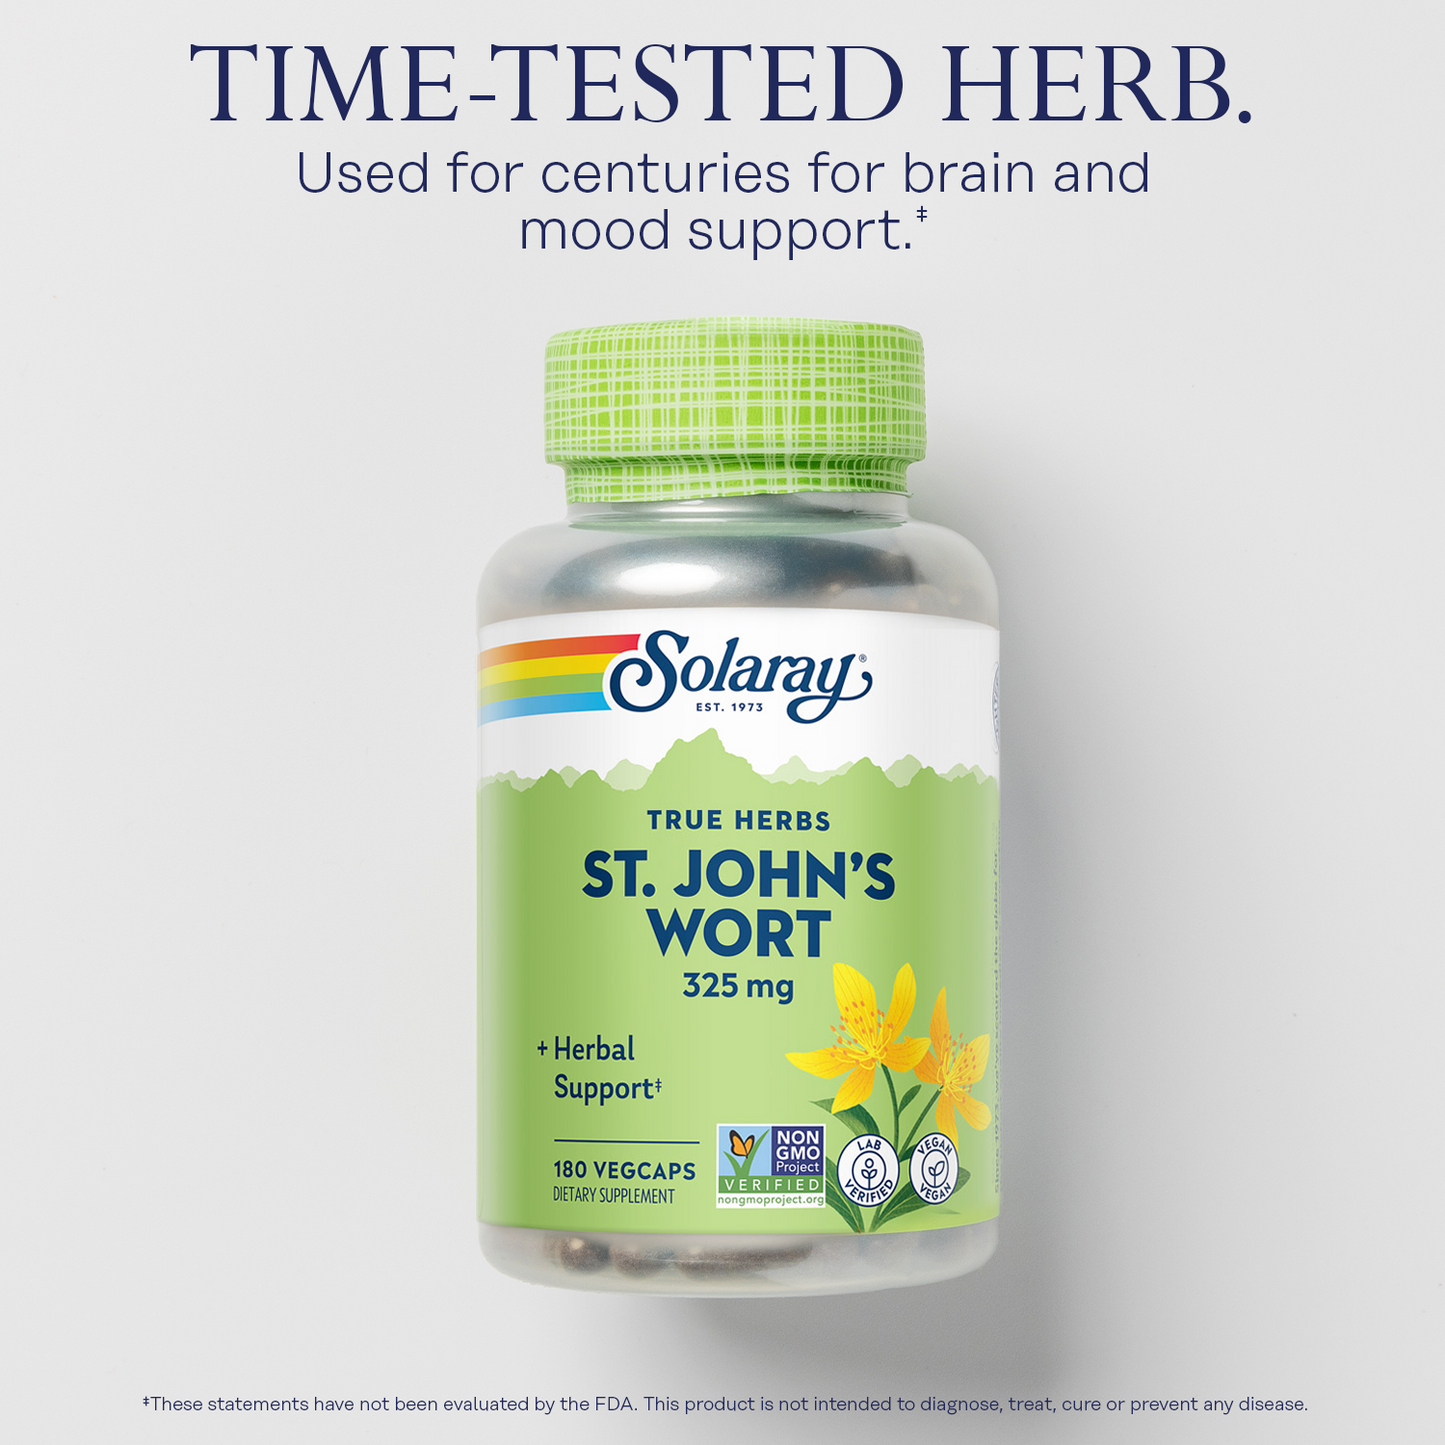 Solaray St John’s Wort 325 mg Whole Aerial - Brain Health and Mood Support Supplement - 60-Day Money Back Guarantee - Non-GMO, Vegan, Lab Verified